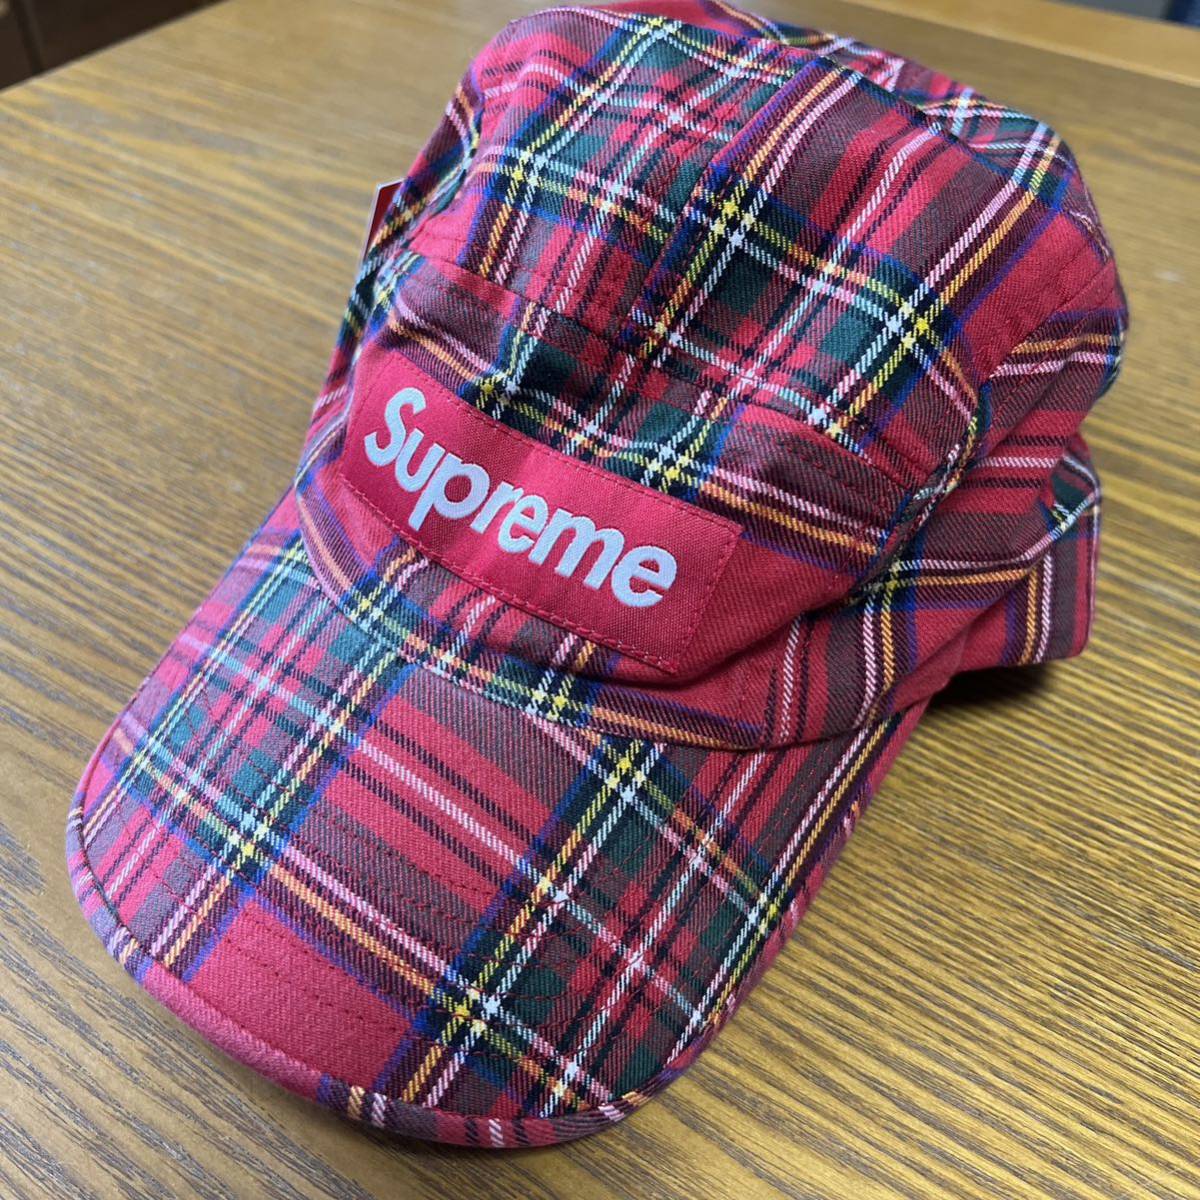 Supreme 20AW Washed Chino Twill Camp Cap シュプリーム キャンプキャップ 赤 チェーン柄